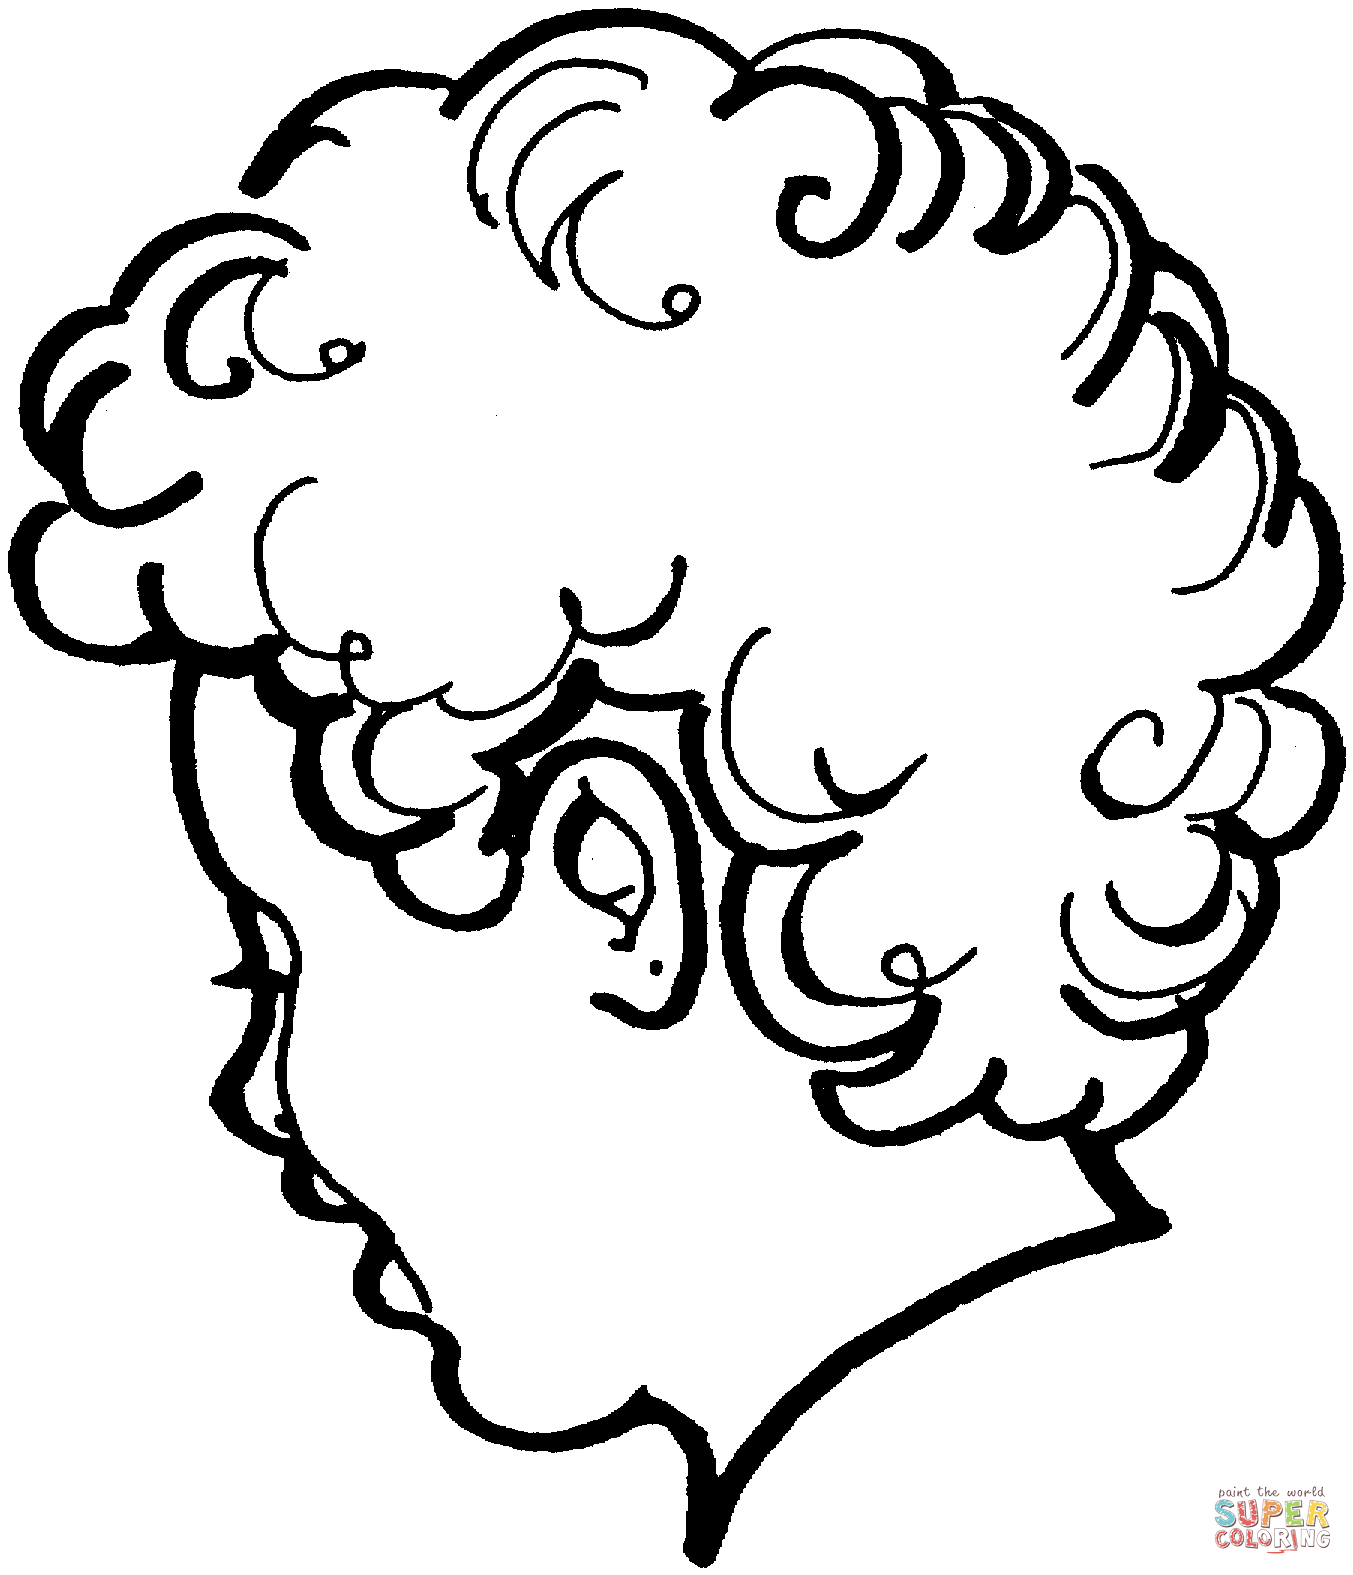 Face and body coloring pages | Free Coloring Pages